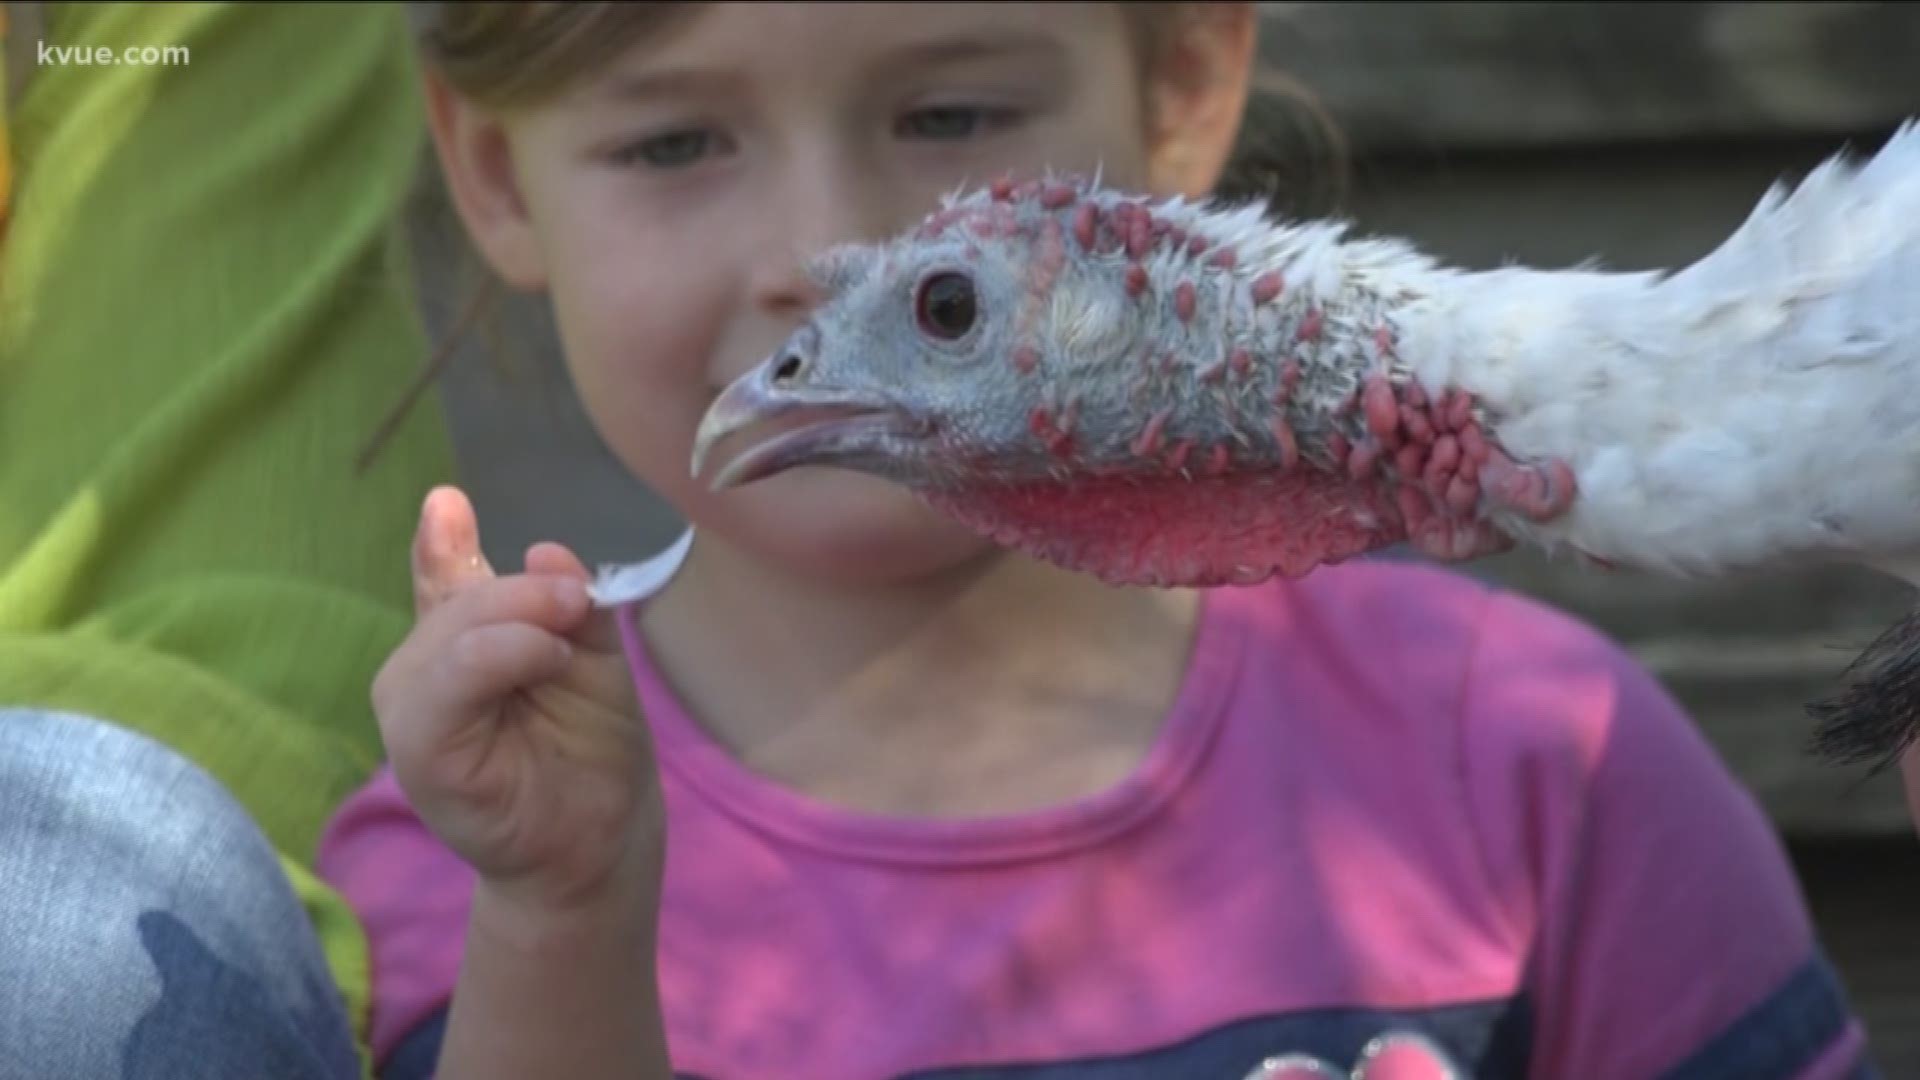 Touching and cuddling with these colorful fowl can bring a boost of confidence to some very special kids.